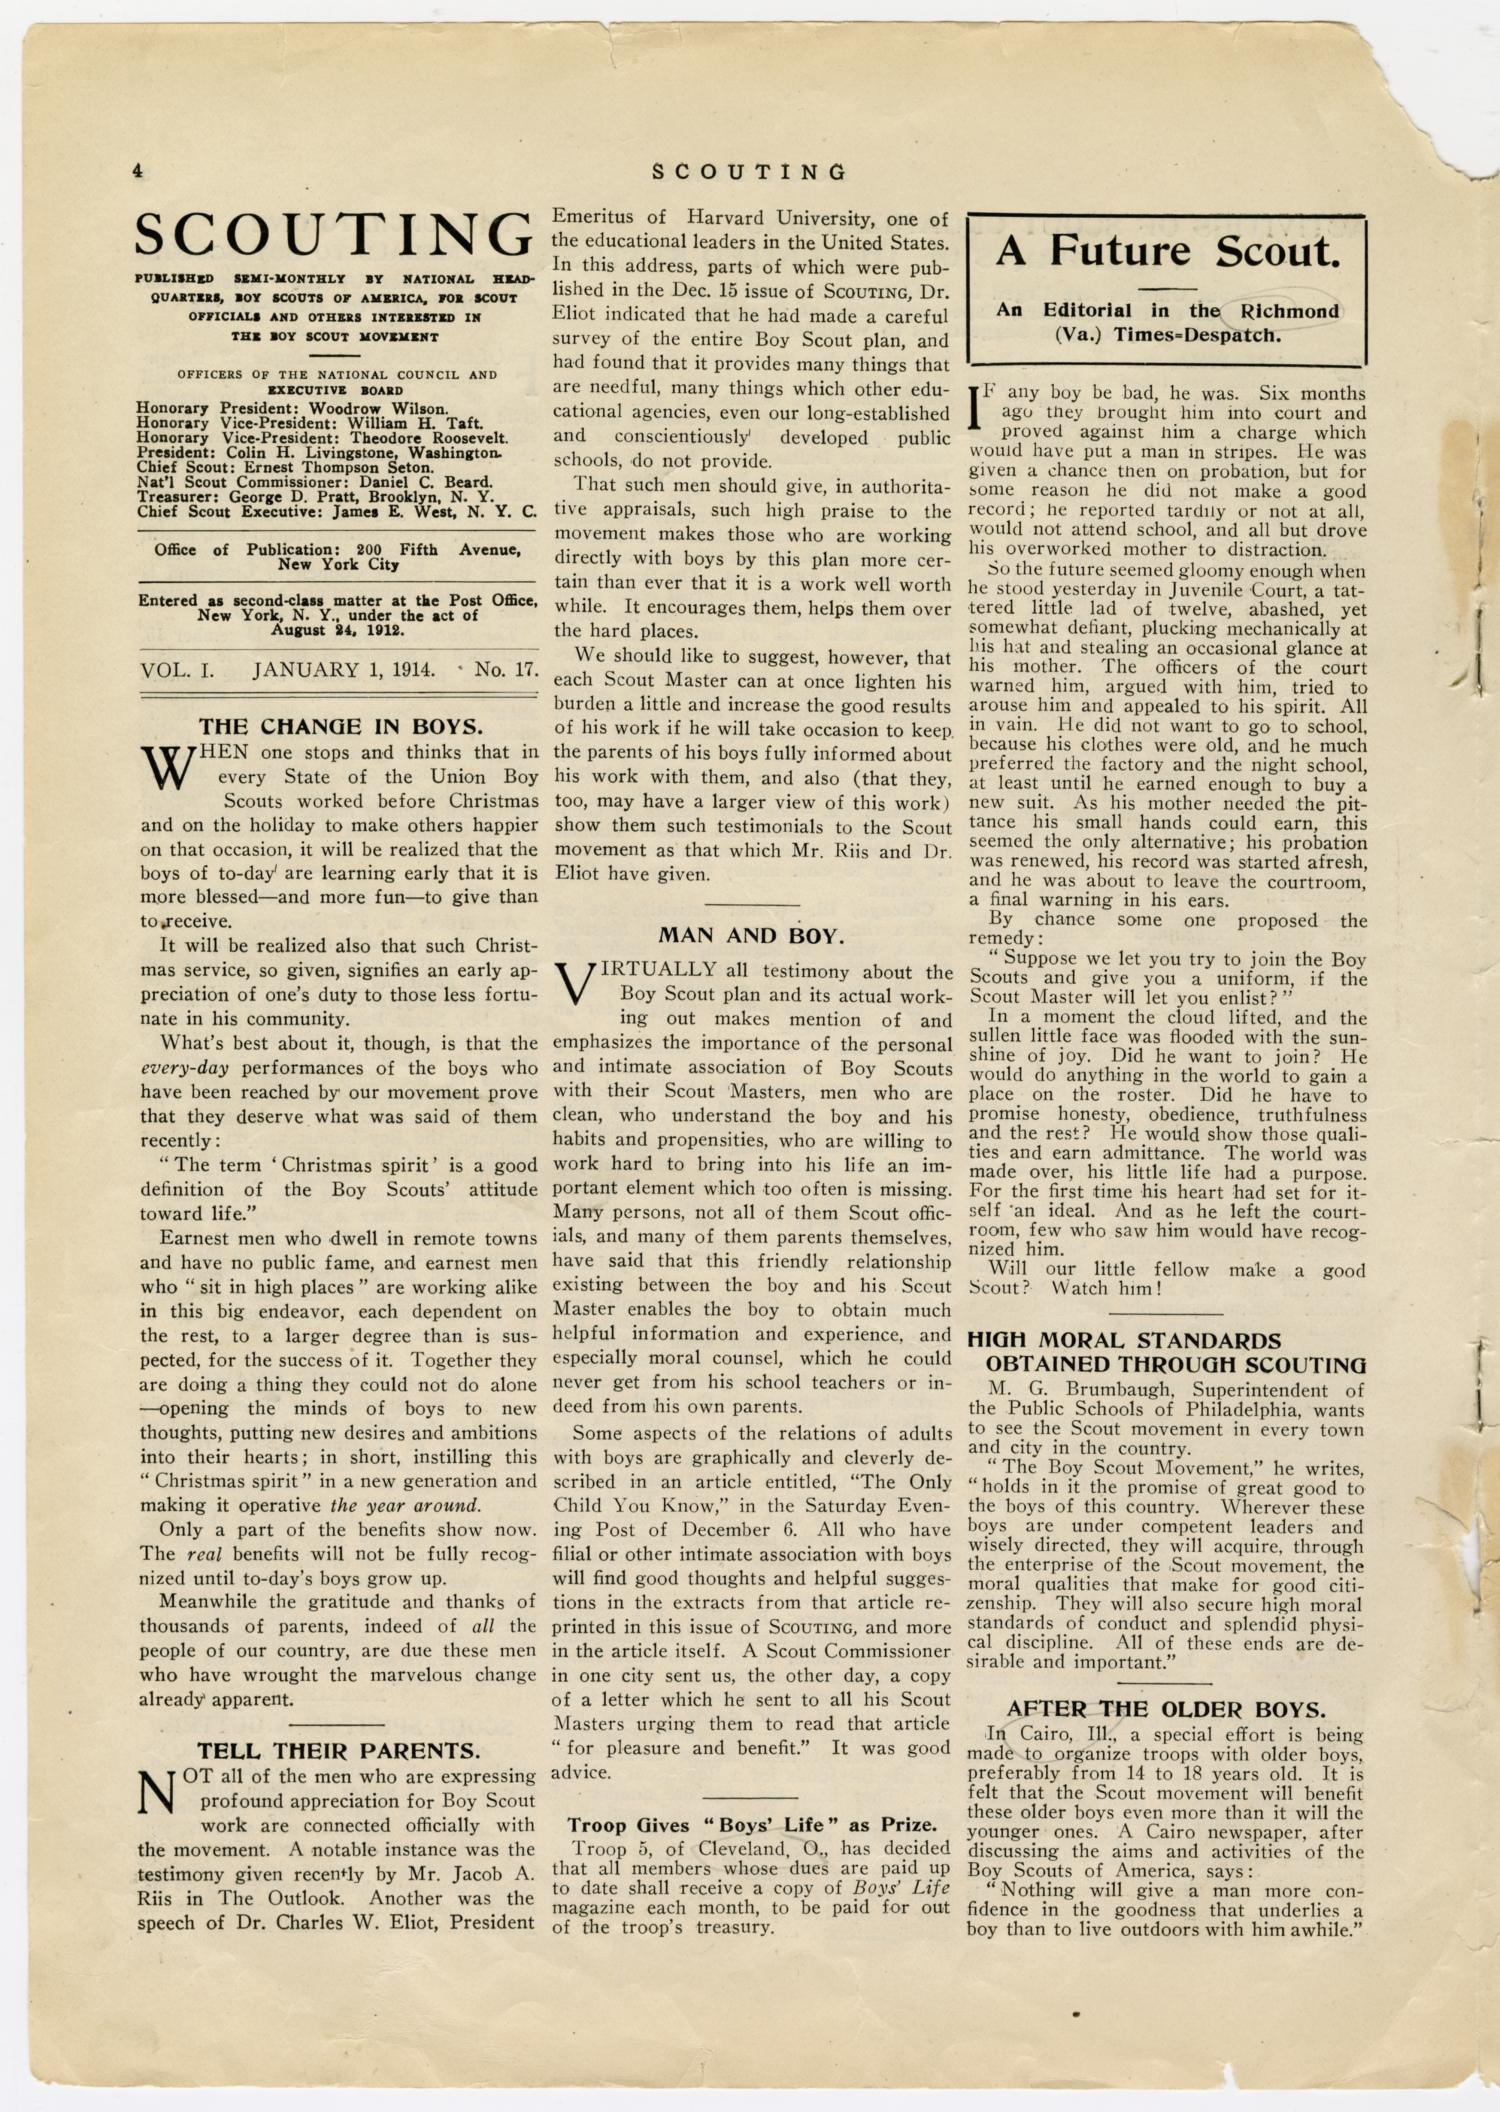 Scouting, Volume 1, Number 17, January 1, 1914
                                                
                                                    4
                                                